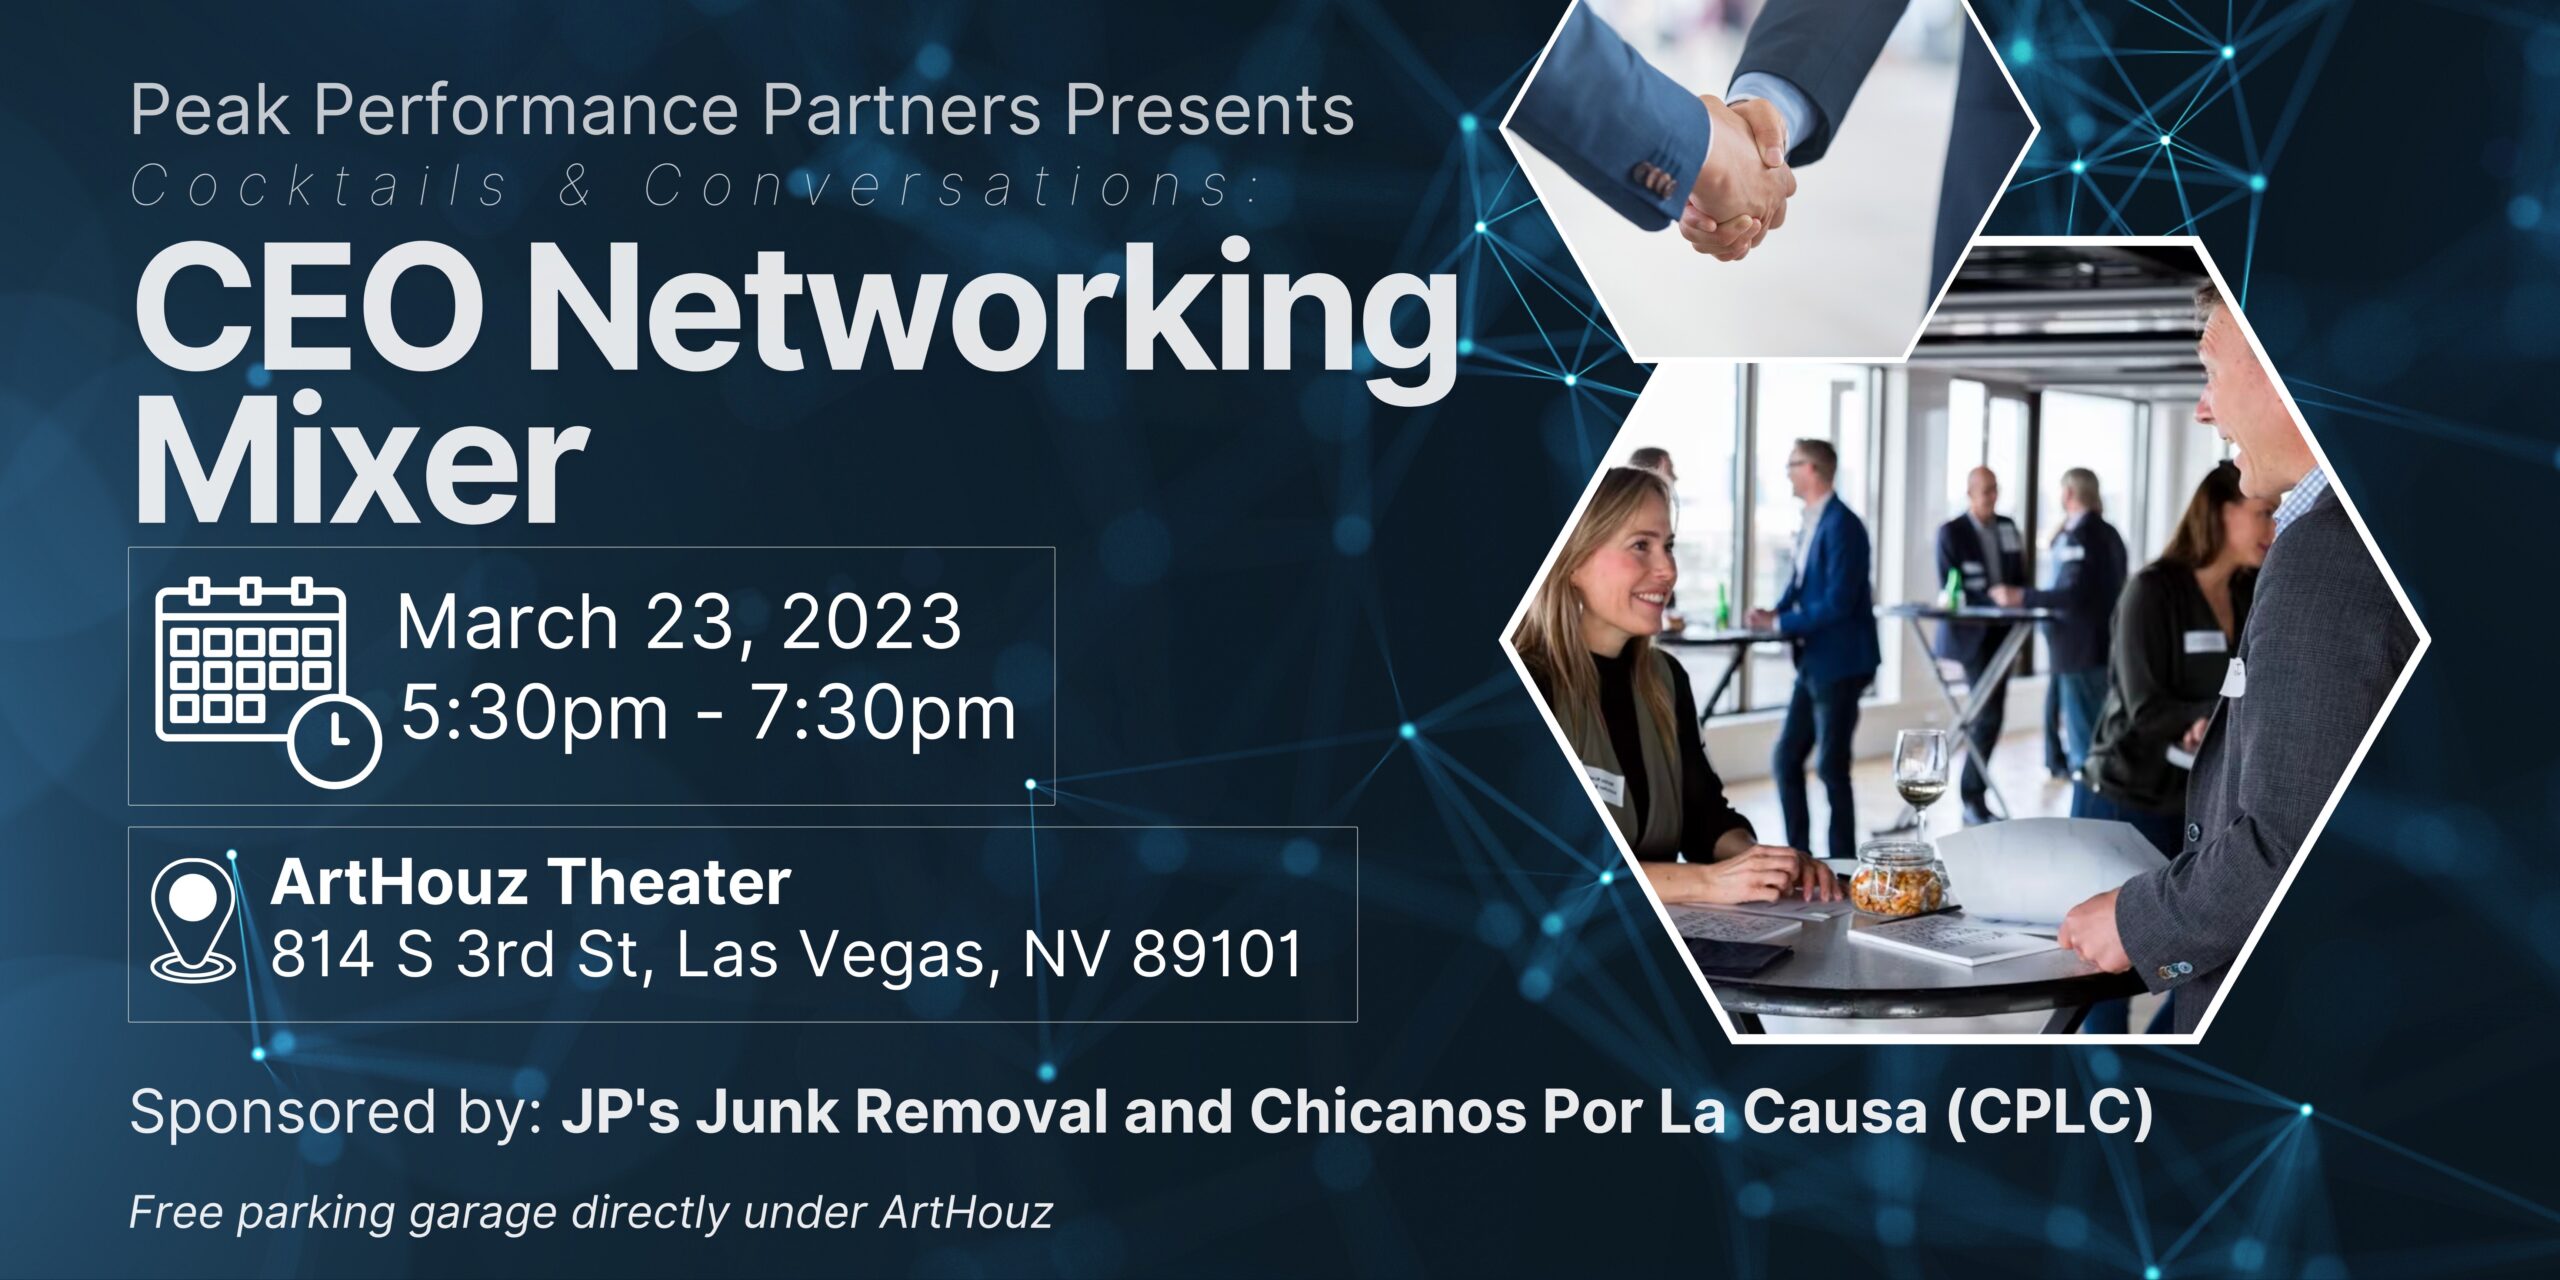 CEO Networking Mixer - Cocktails & Conversations